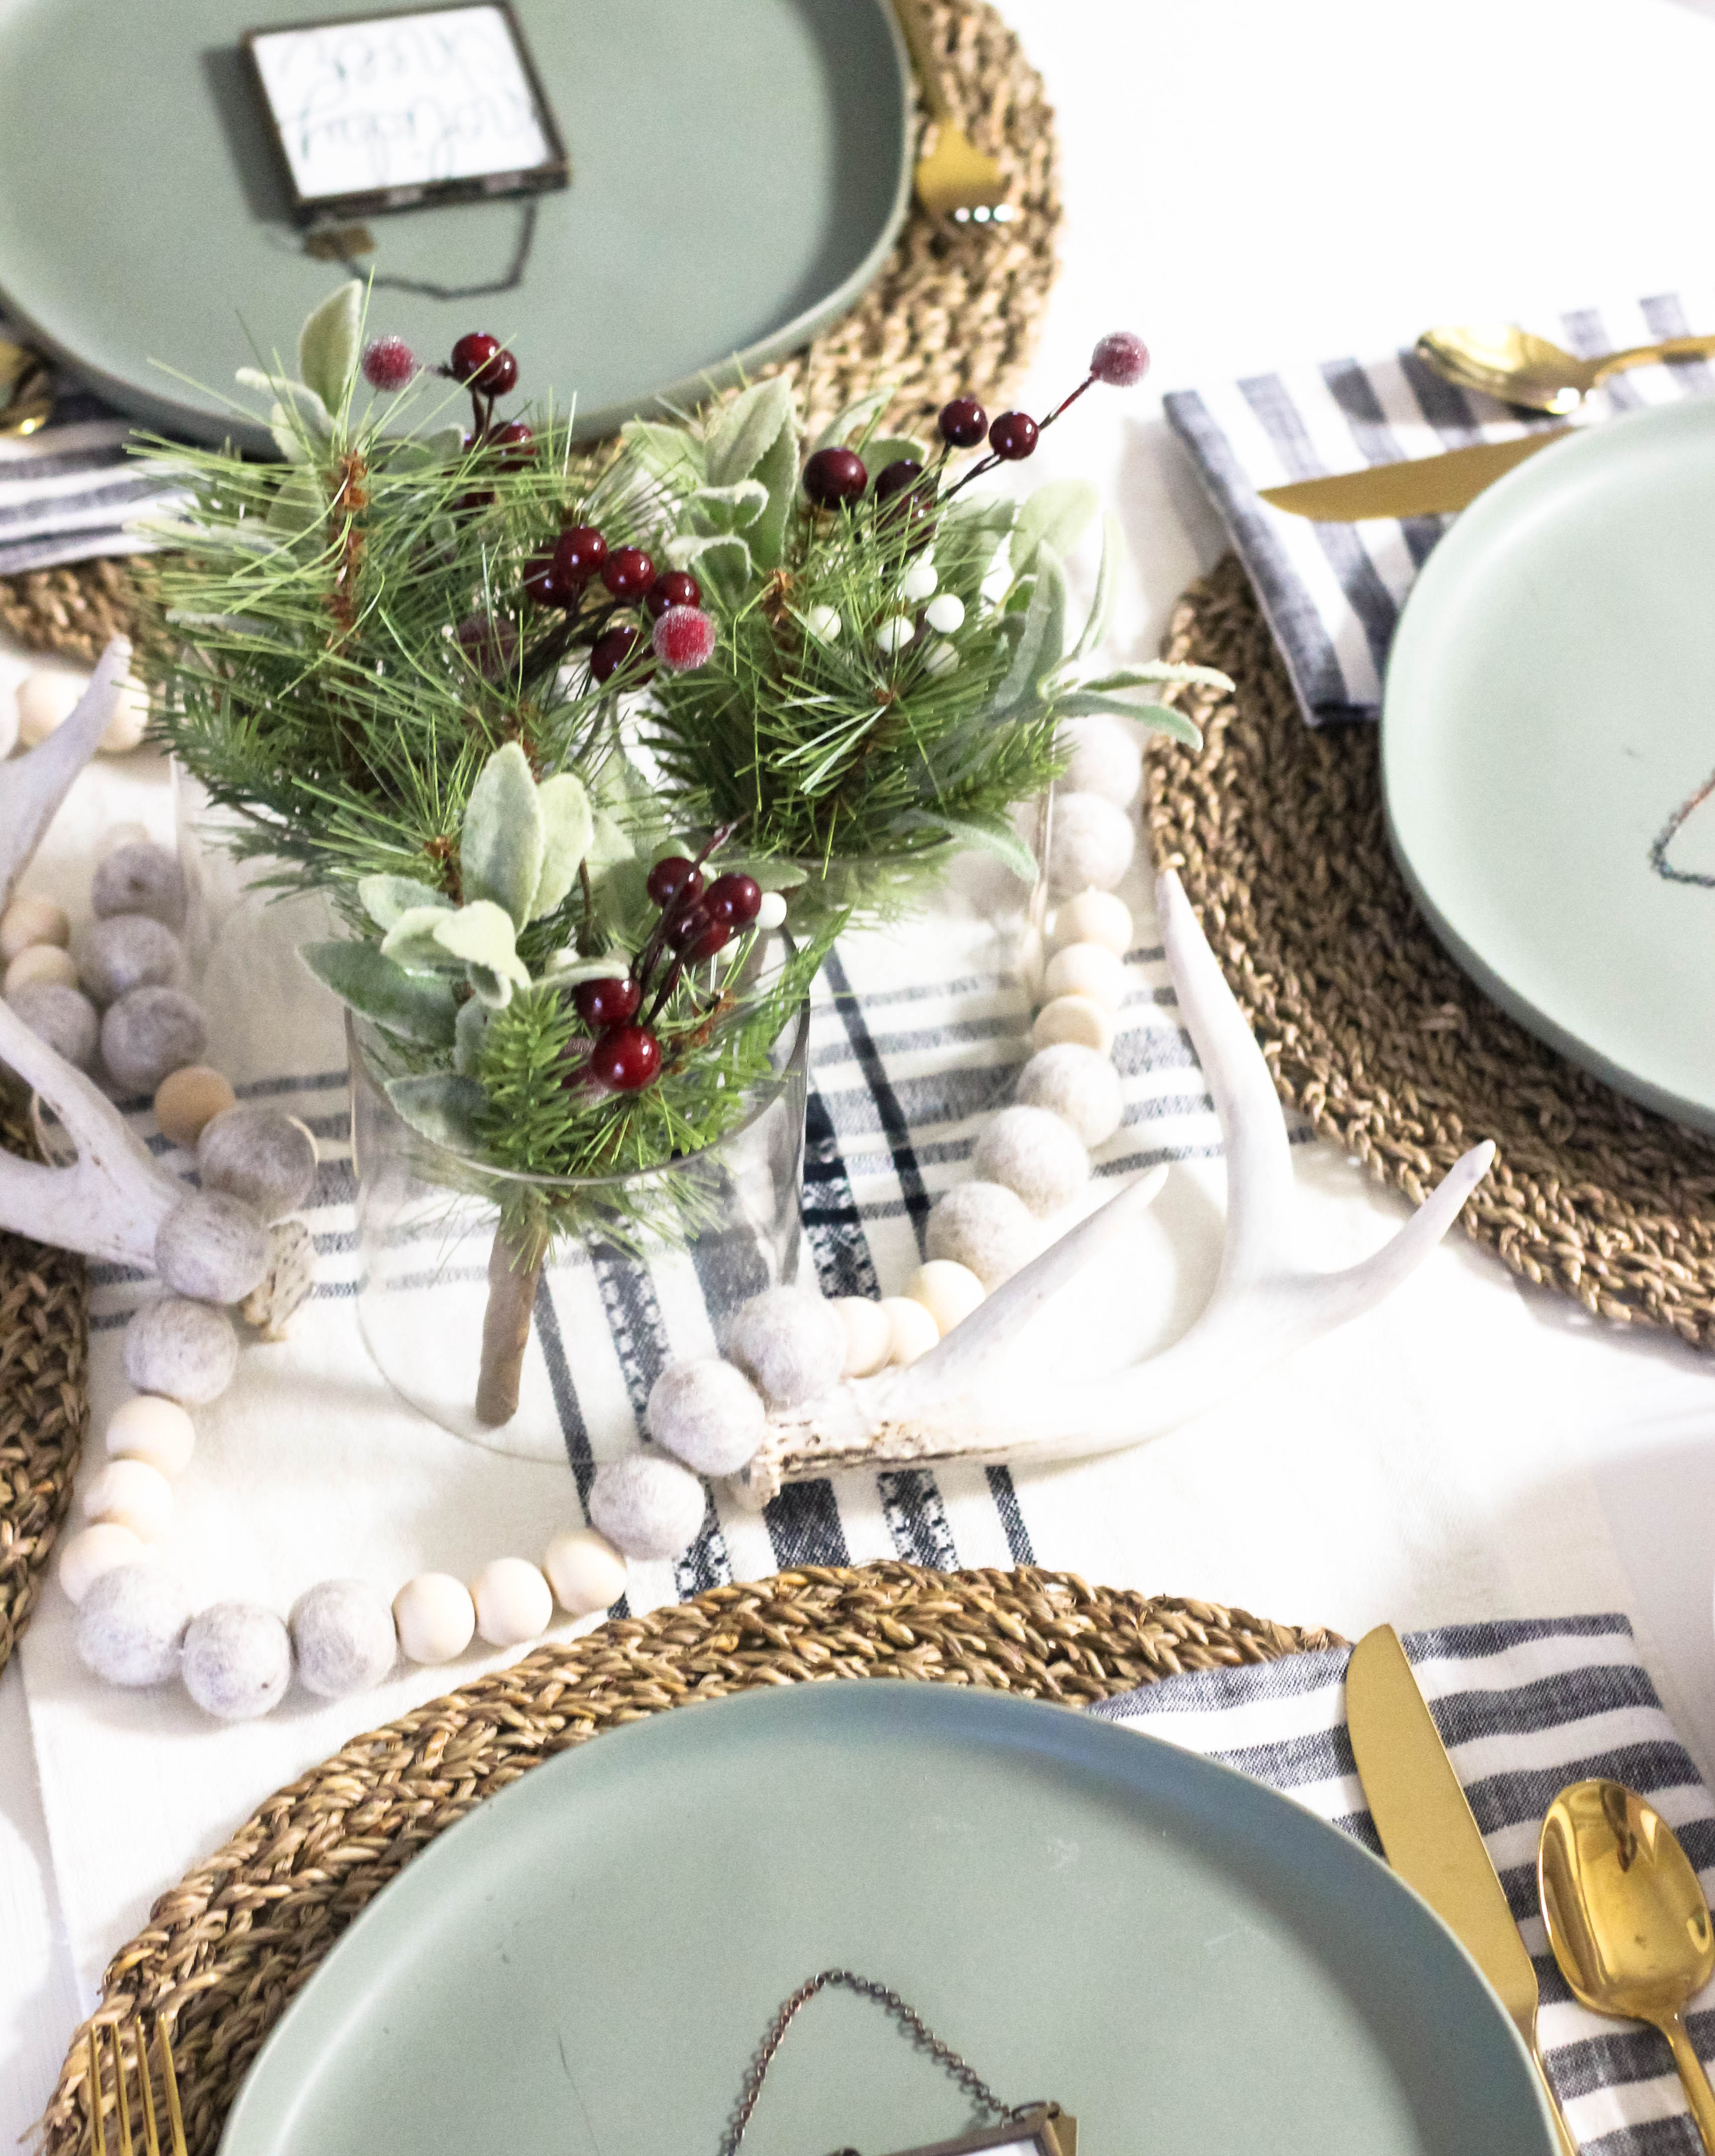 Creating a centerpiece for a holiday table.